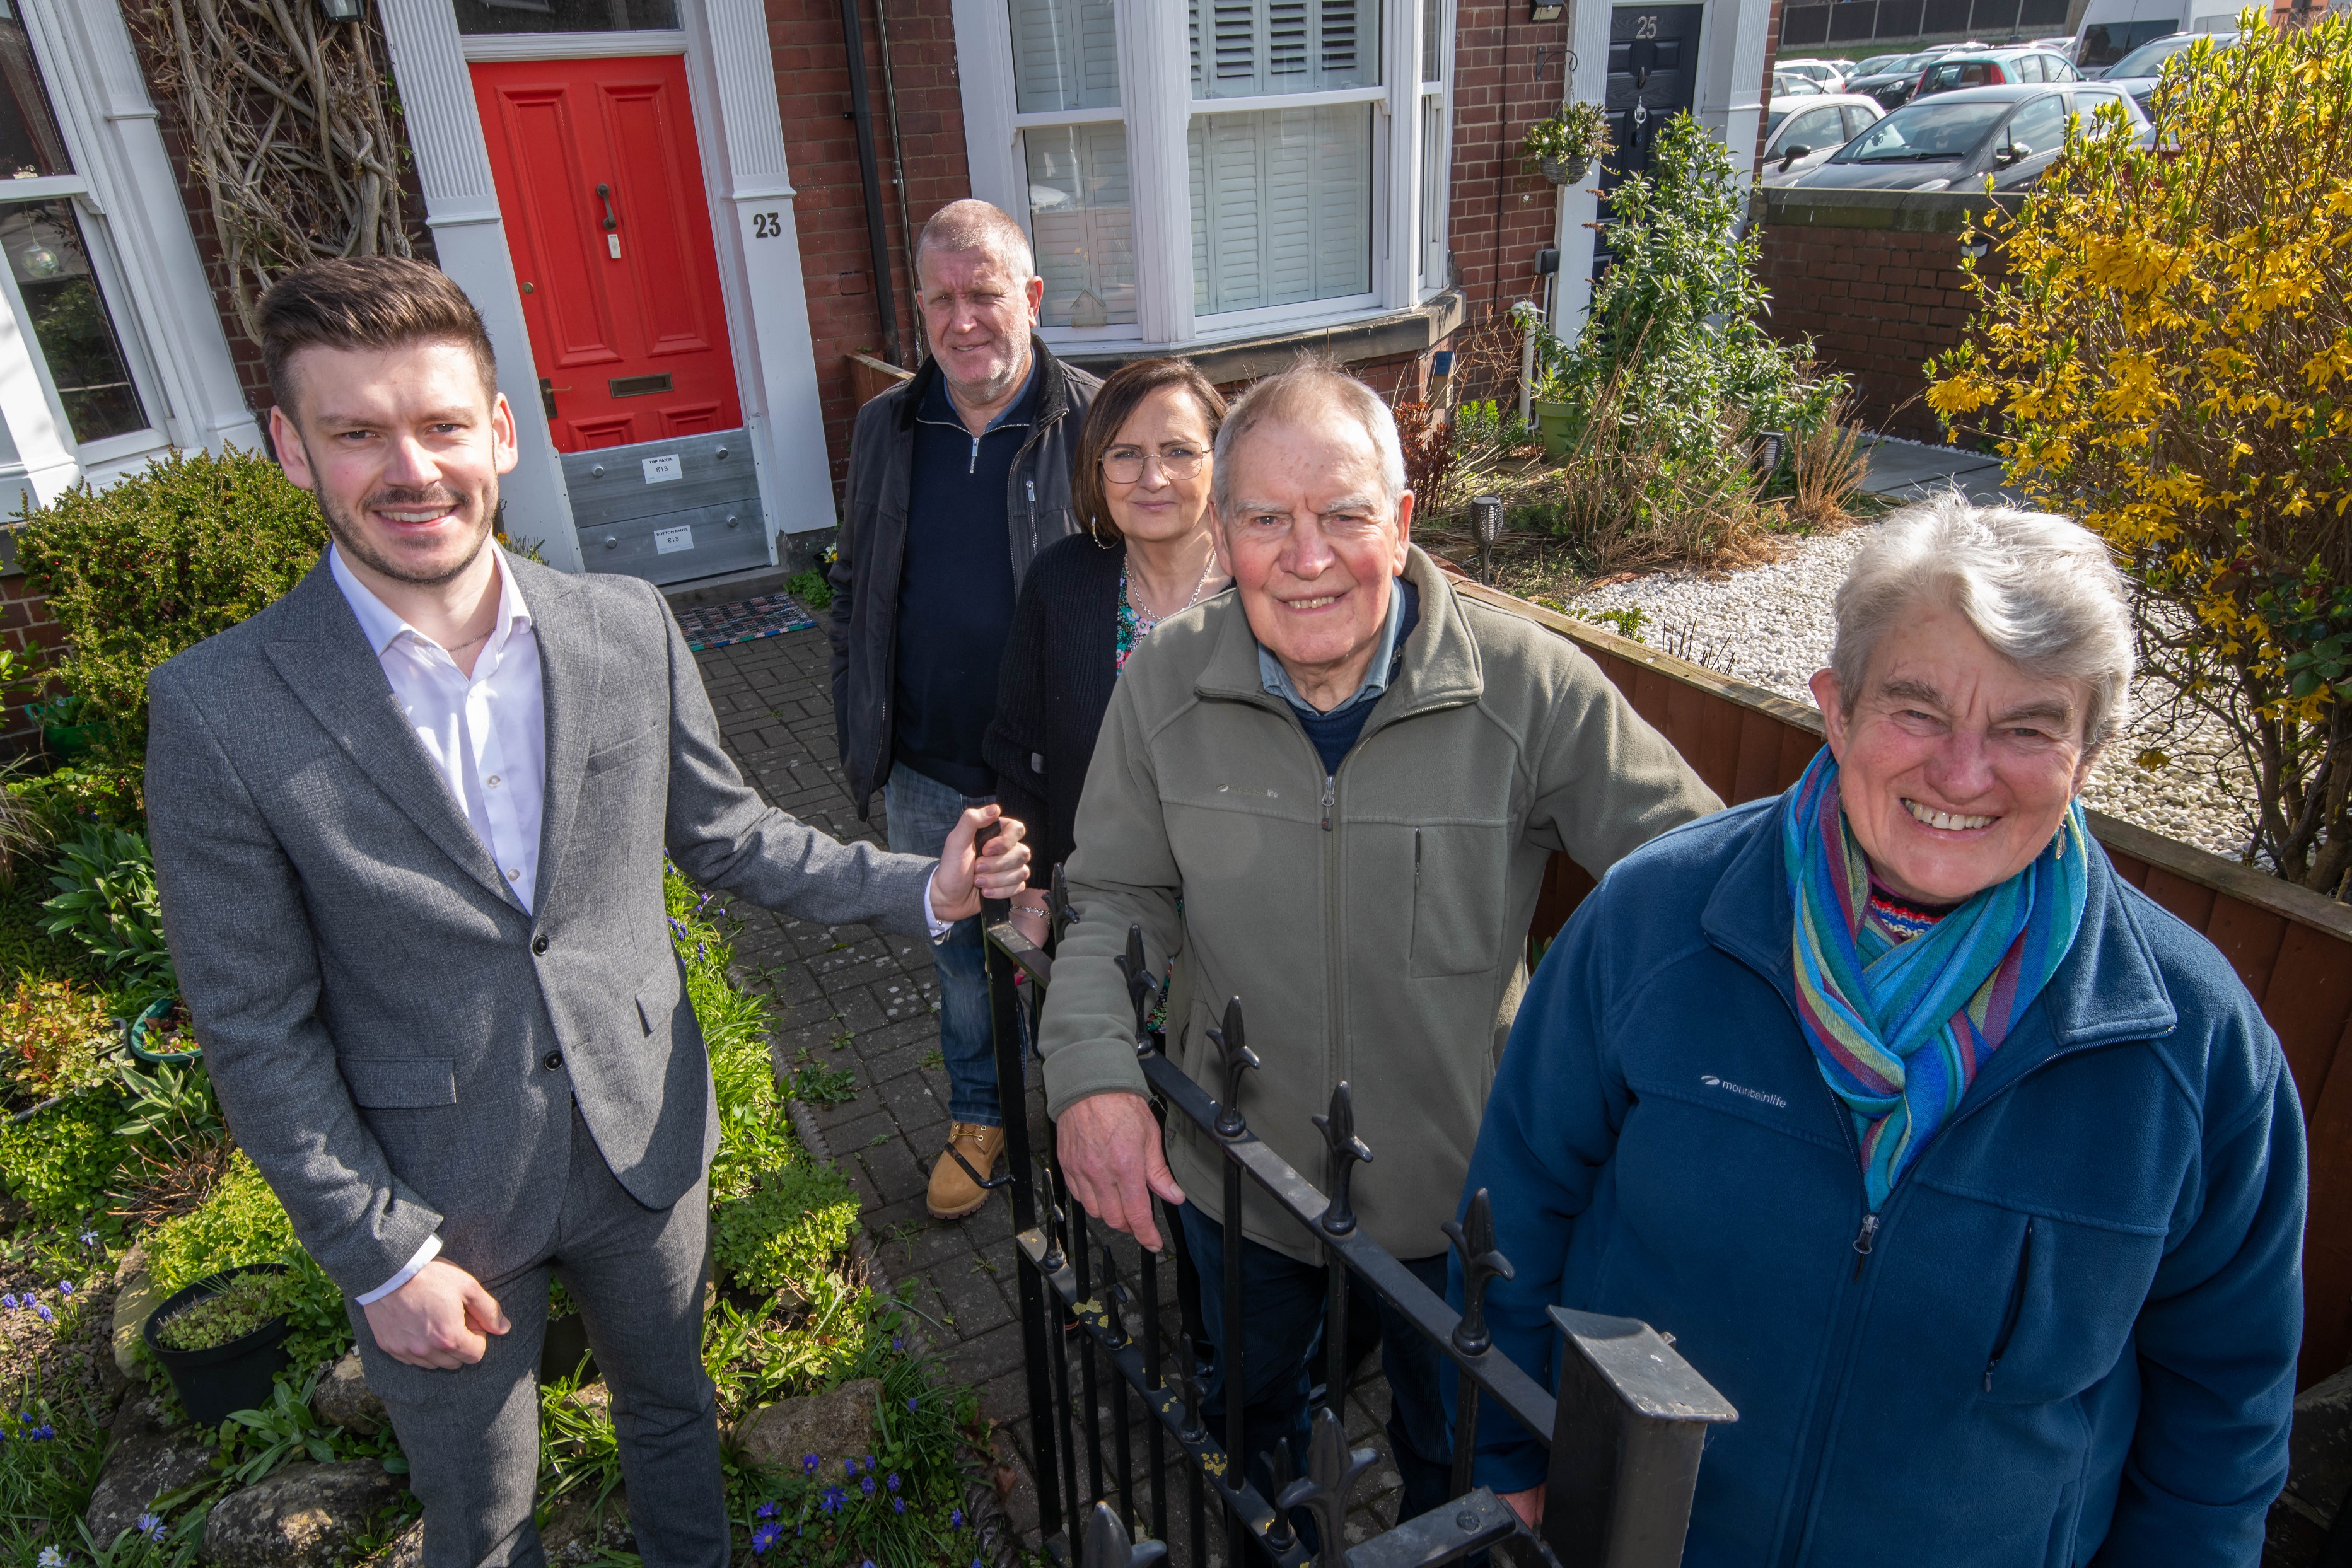 executive member for highways and transport, Cllr Keane Duncan, whose portfolio includes flood protection, with some of the householders who have benefited from improved defences at their properties. From left to right, Cllr Duncan, Terry and Clare Harding, and Peter and Janice Clark